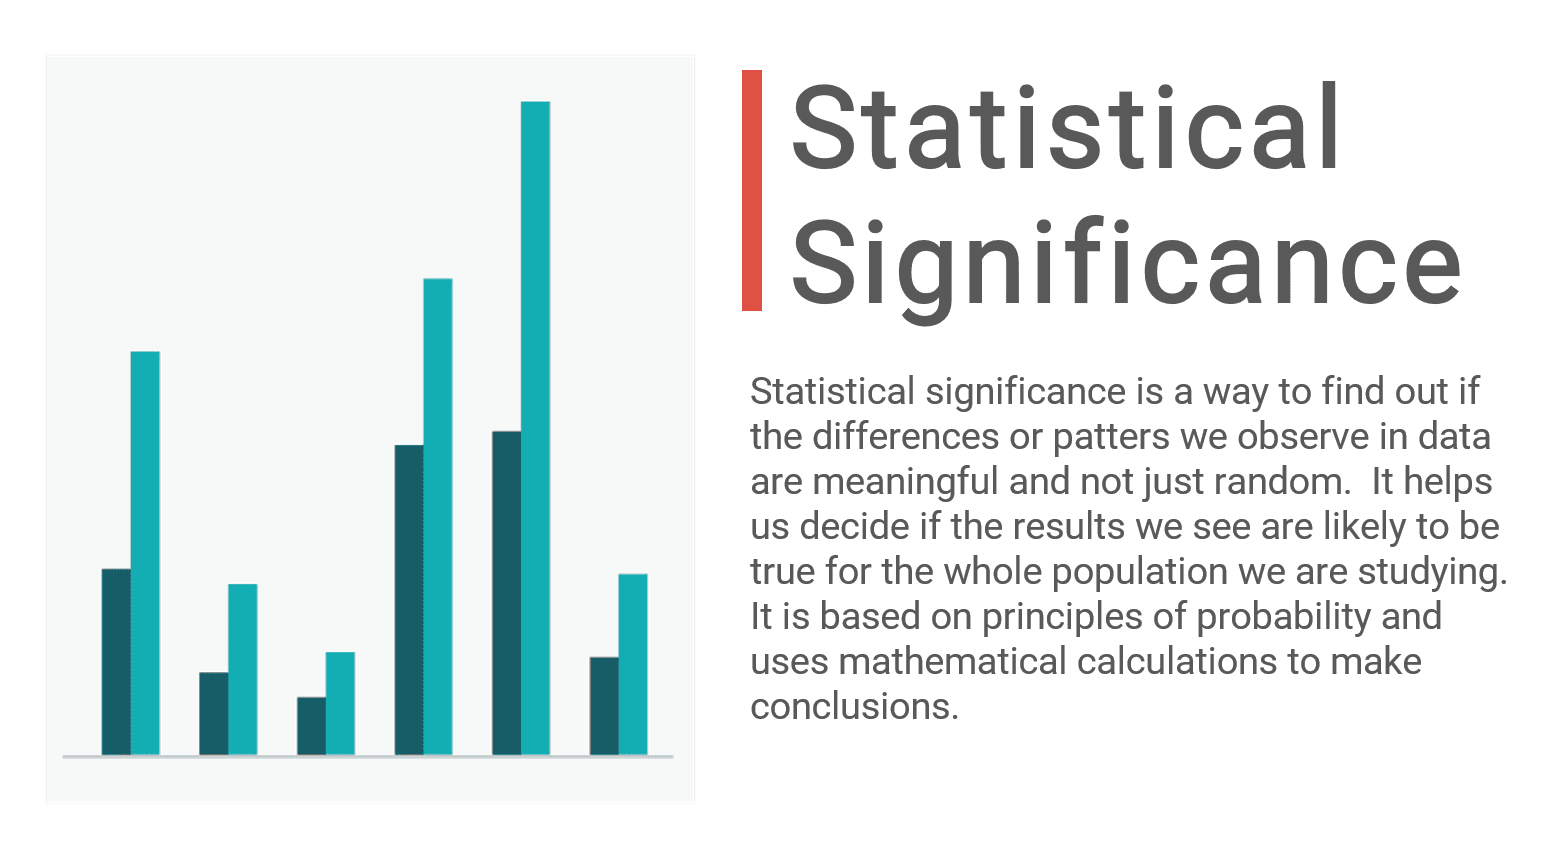 understanding-the-significance-of-statistical-results-it-s-more-than